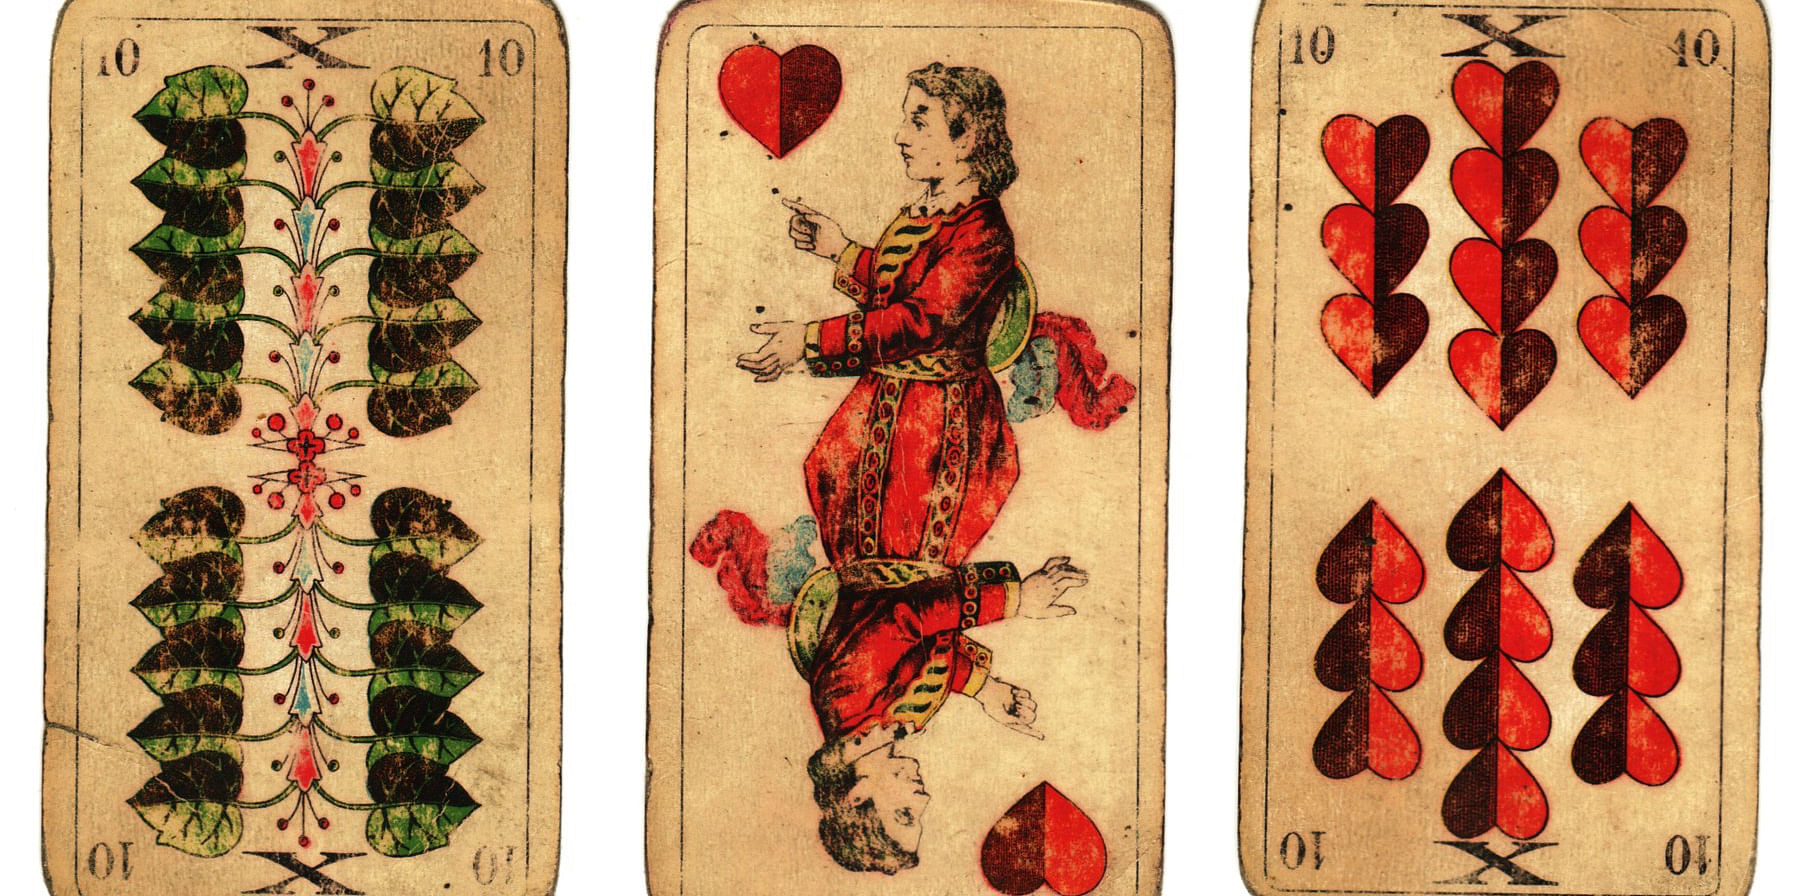 https://vinc.gumlet.io/gallery/blog/thumbs/the-history-of-playing-cards.jpg